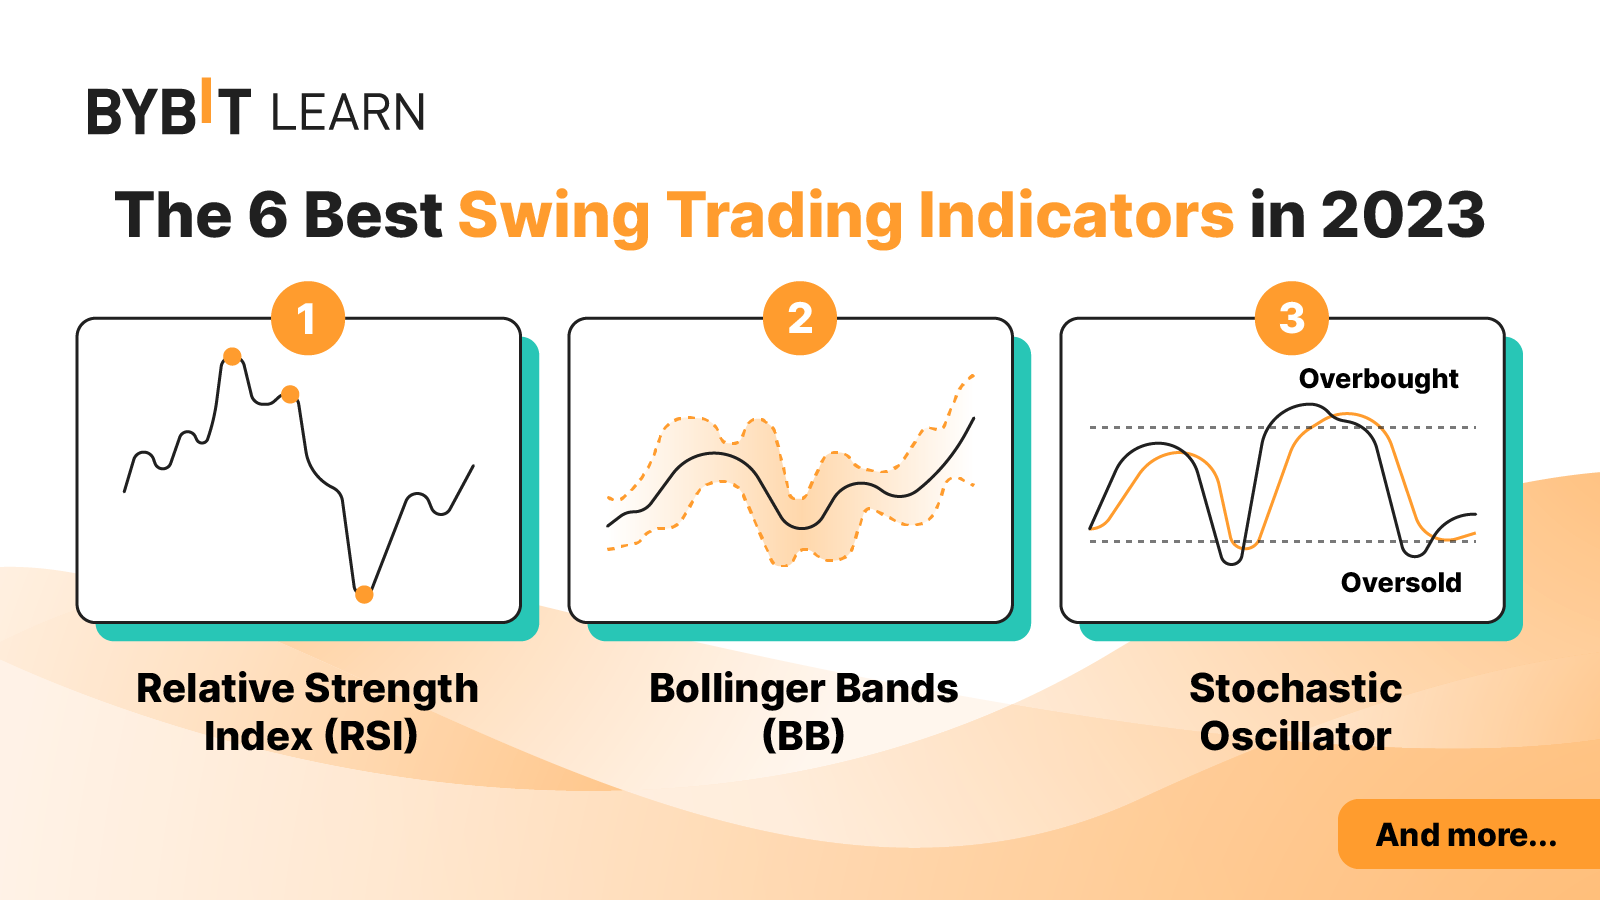 3 Easy Swing Trading Crypto Strategies to Implement | Investment U